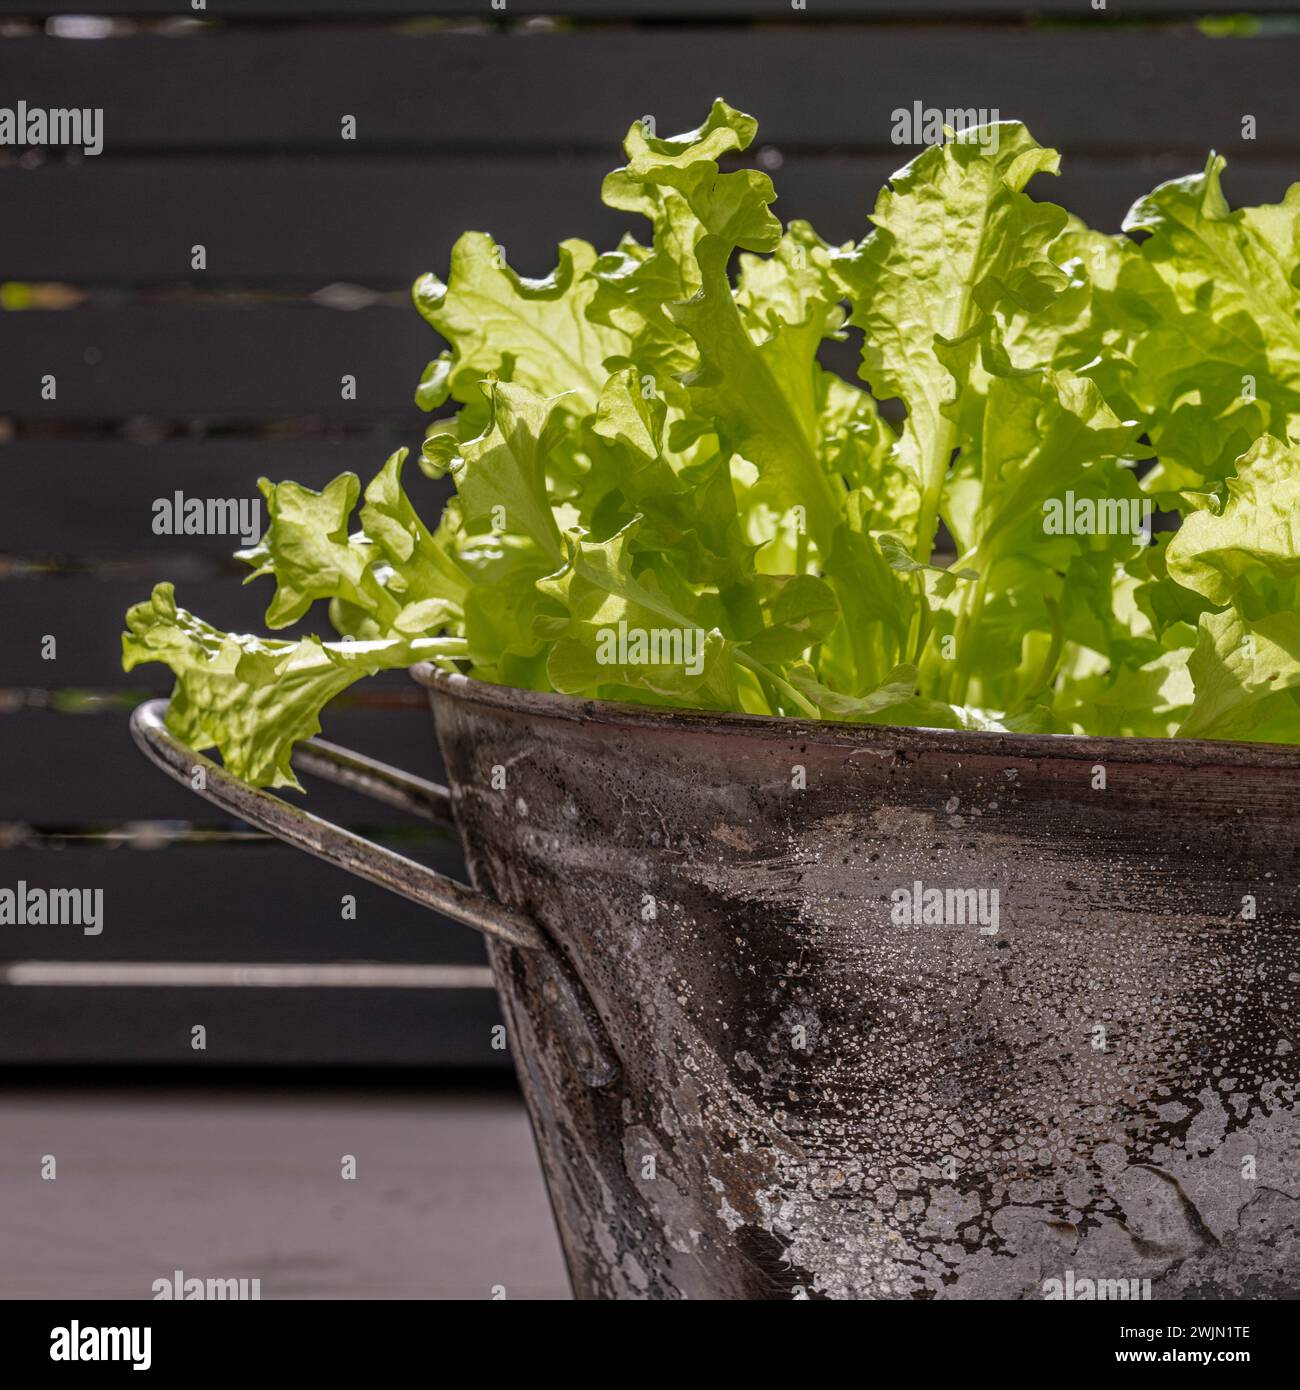 Lollo Bionda lettuce growing in a metal container Stock Photo